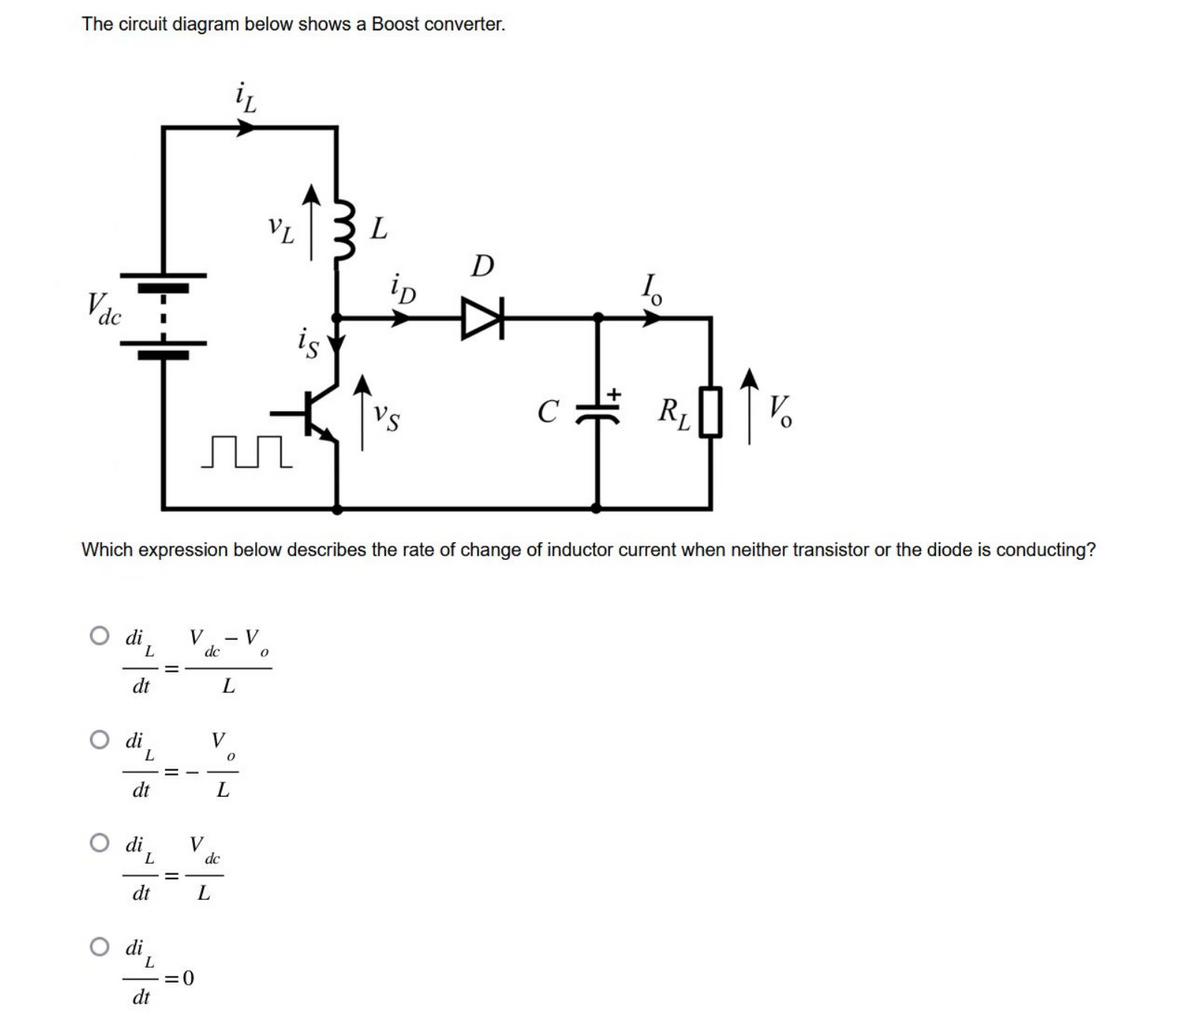 The circuit diagram below shows a Boost converter.
V dc
L
dt
L
dt
O di
L
dt
O di
L
dt
r
Which expression below describes the rate of change of inductor current when neither transistor or the diode is conducting?
V - V
dc
V
=0
it
V
dc
L
L
L
VL
0
is
0
L
ip
VS
D
☆
C
I。
RL
V